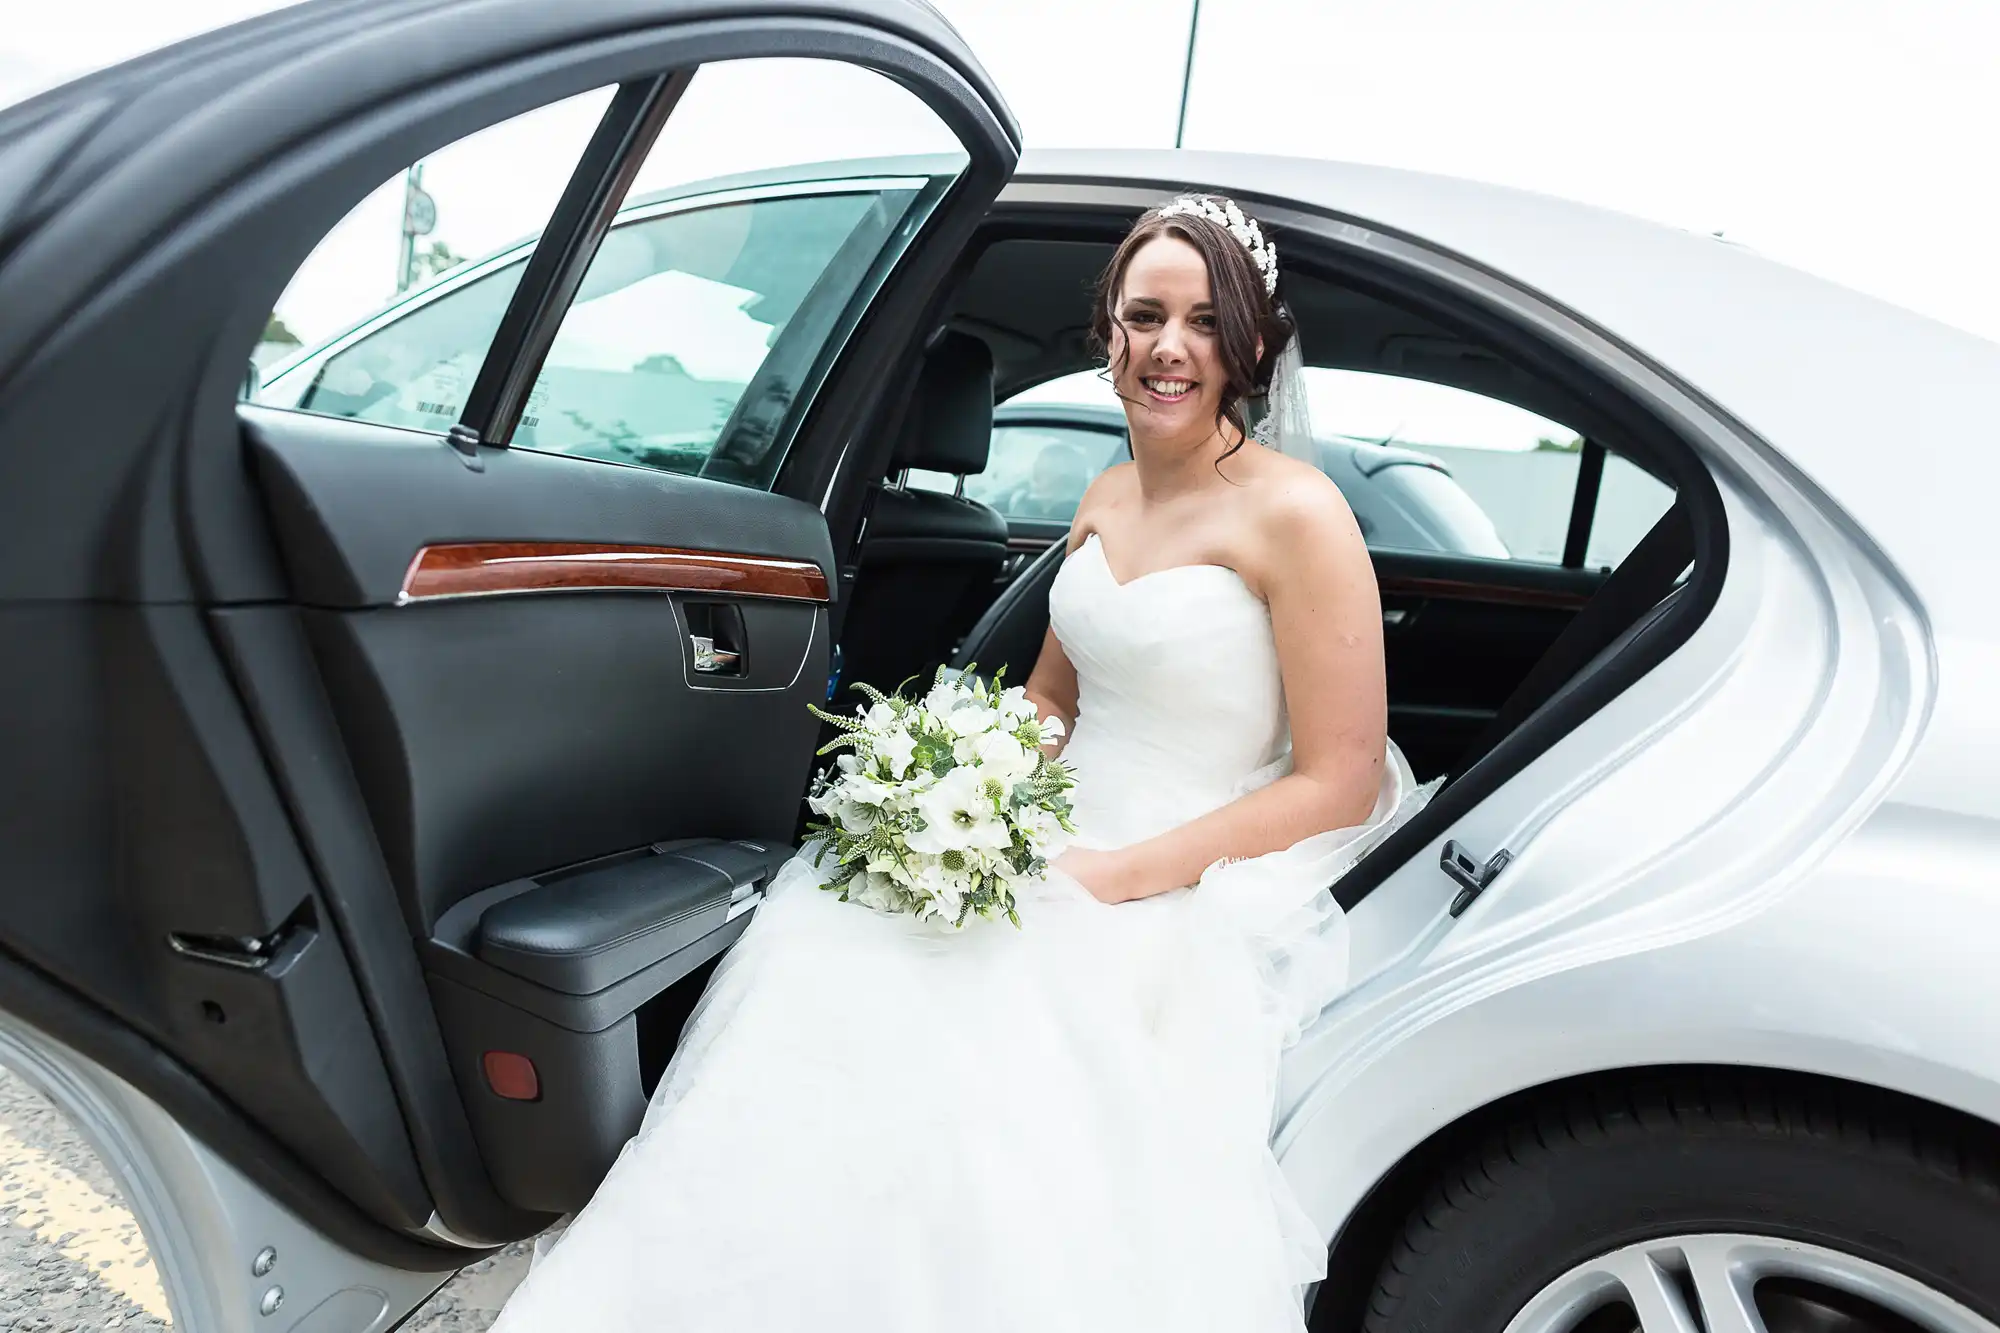 A bride in a white gown sitting inside a car, holding a bouquet, smiling at the camera through the open door.